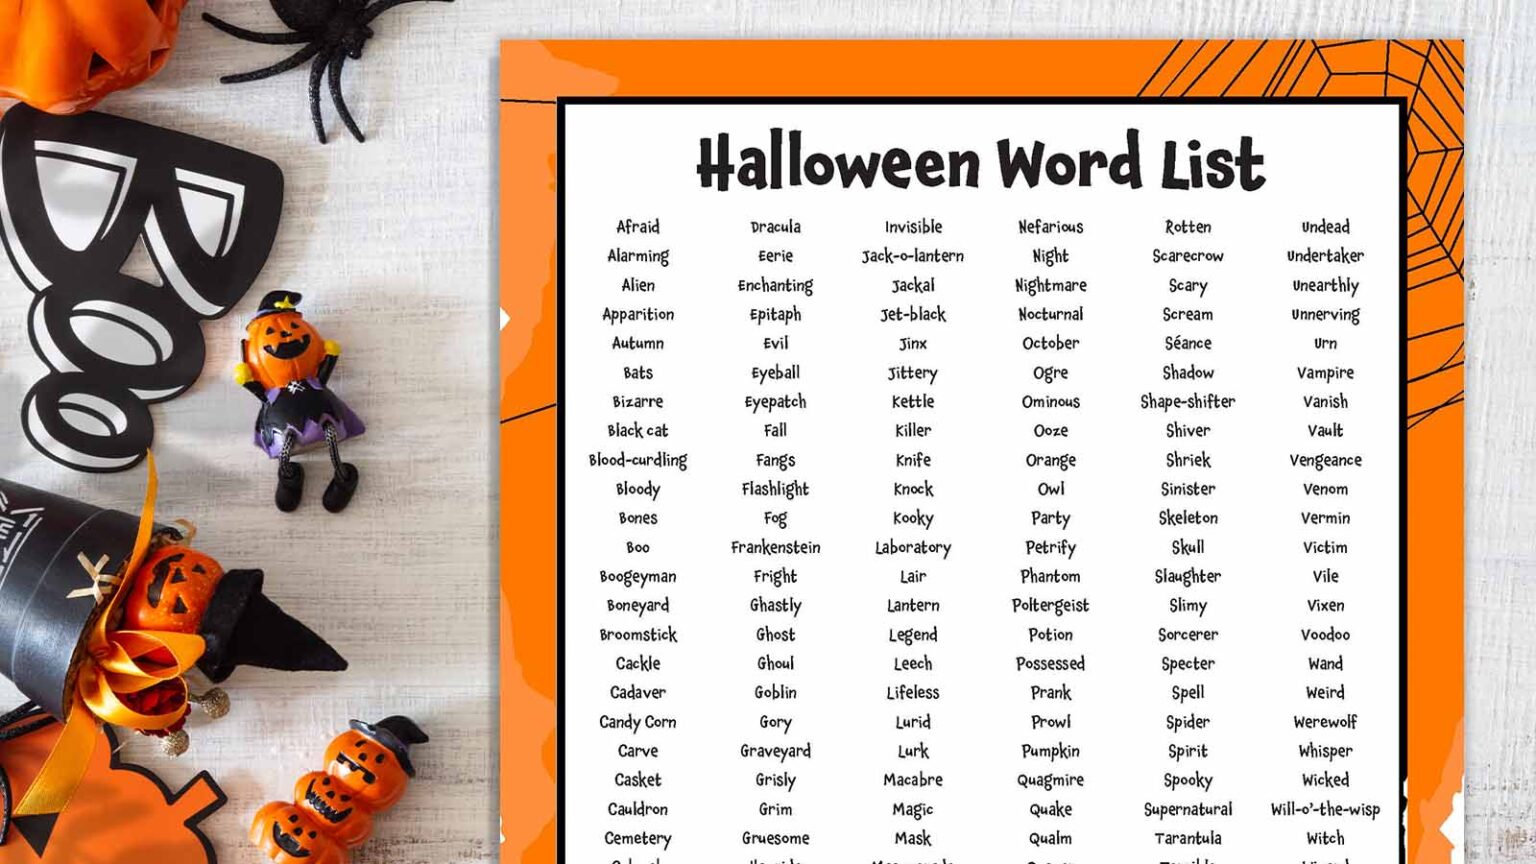 200 Halloween Words for Writing, Vocab, and More (Free Printable)